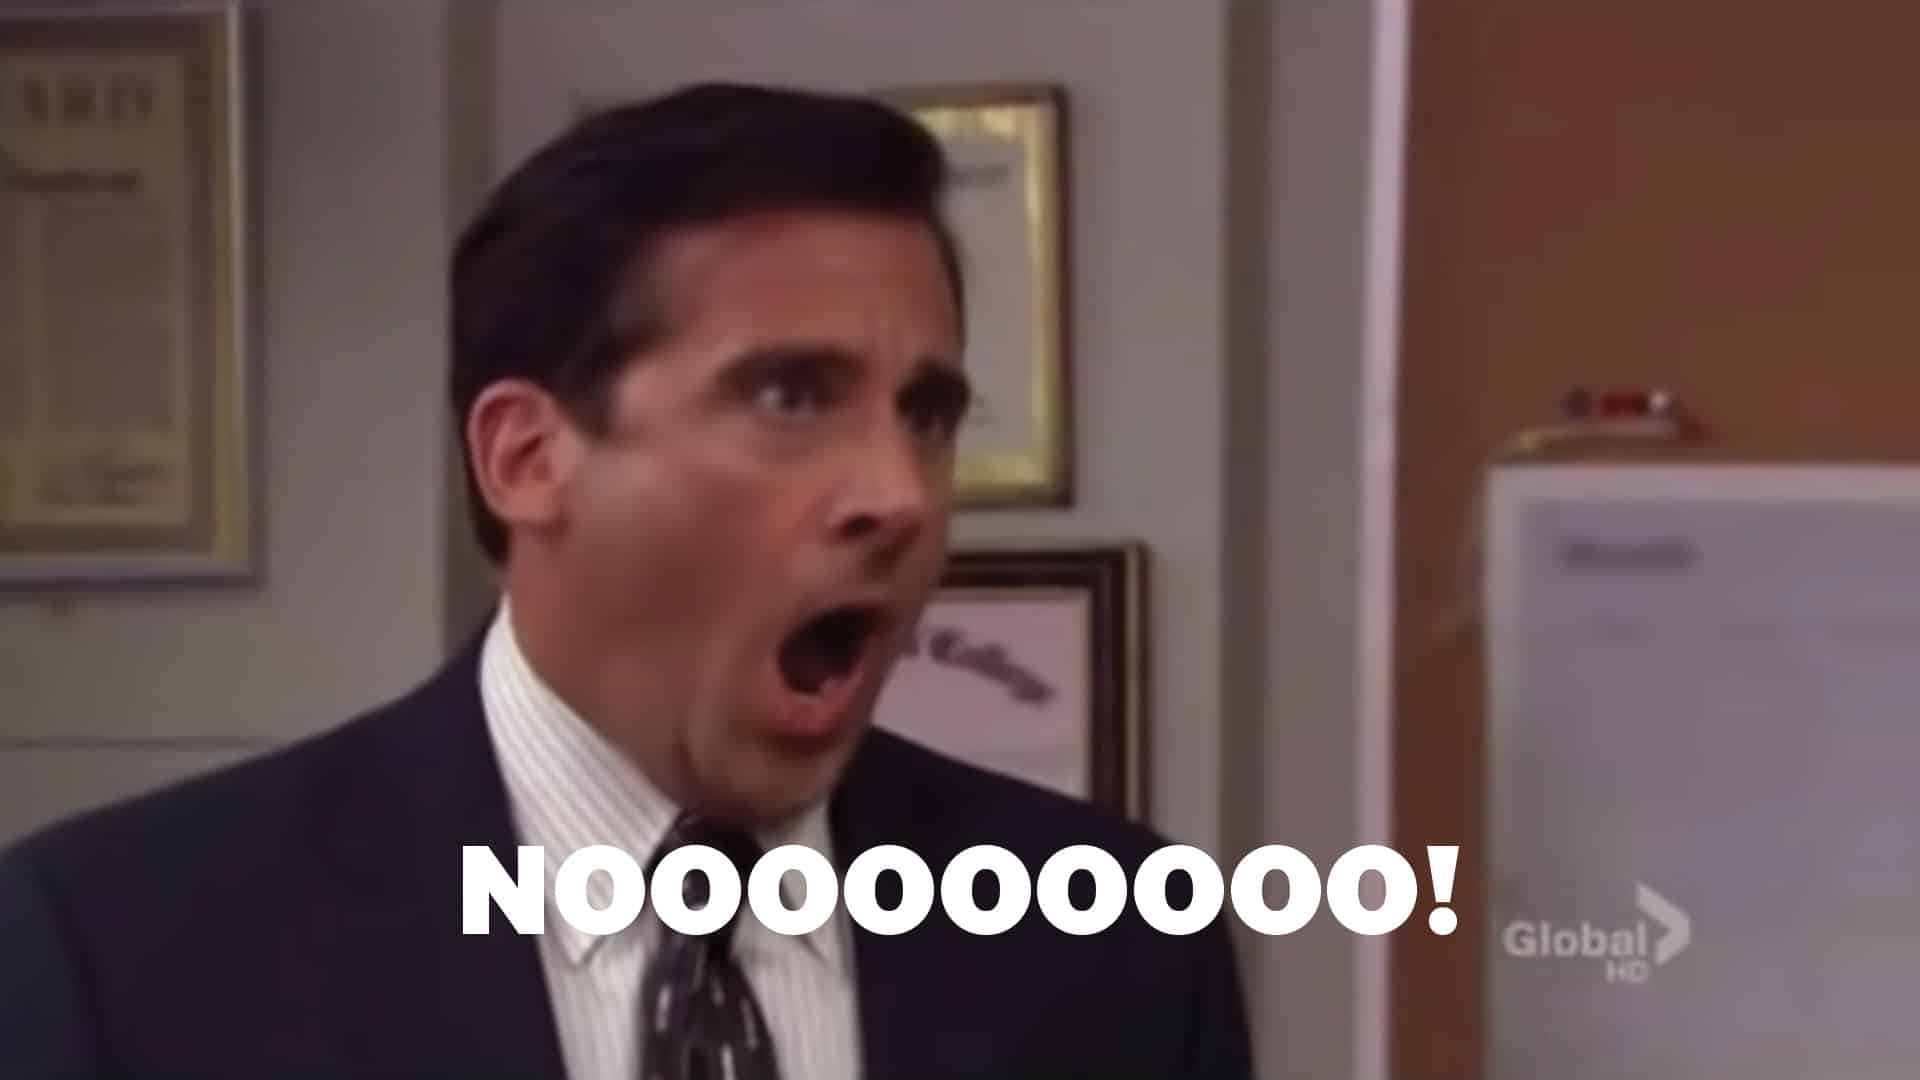 Michael from the Office saying noooo!